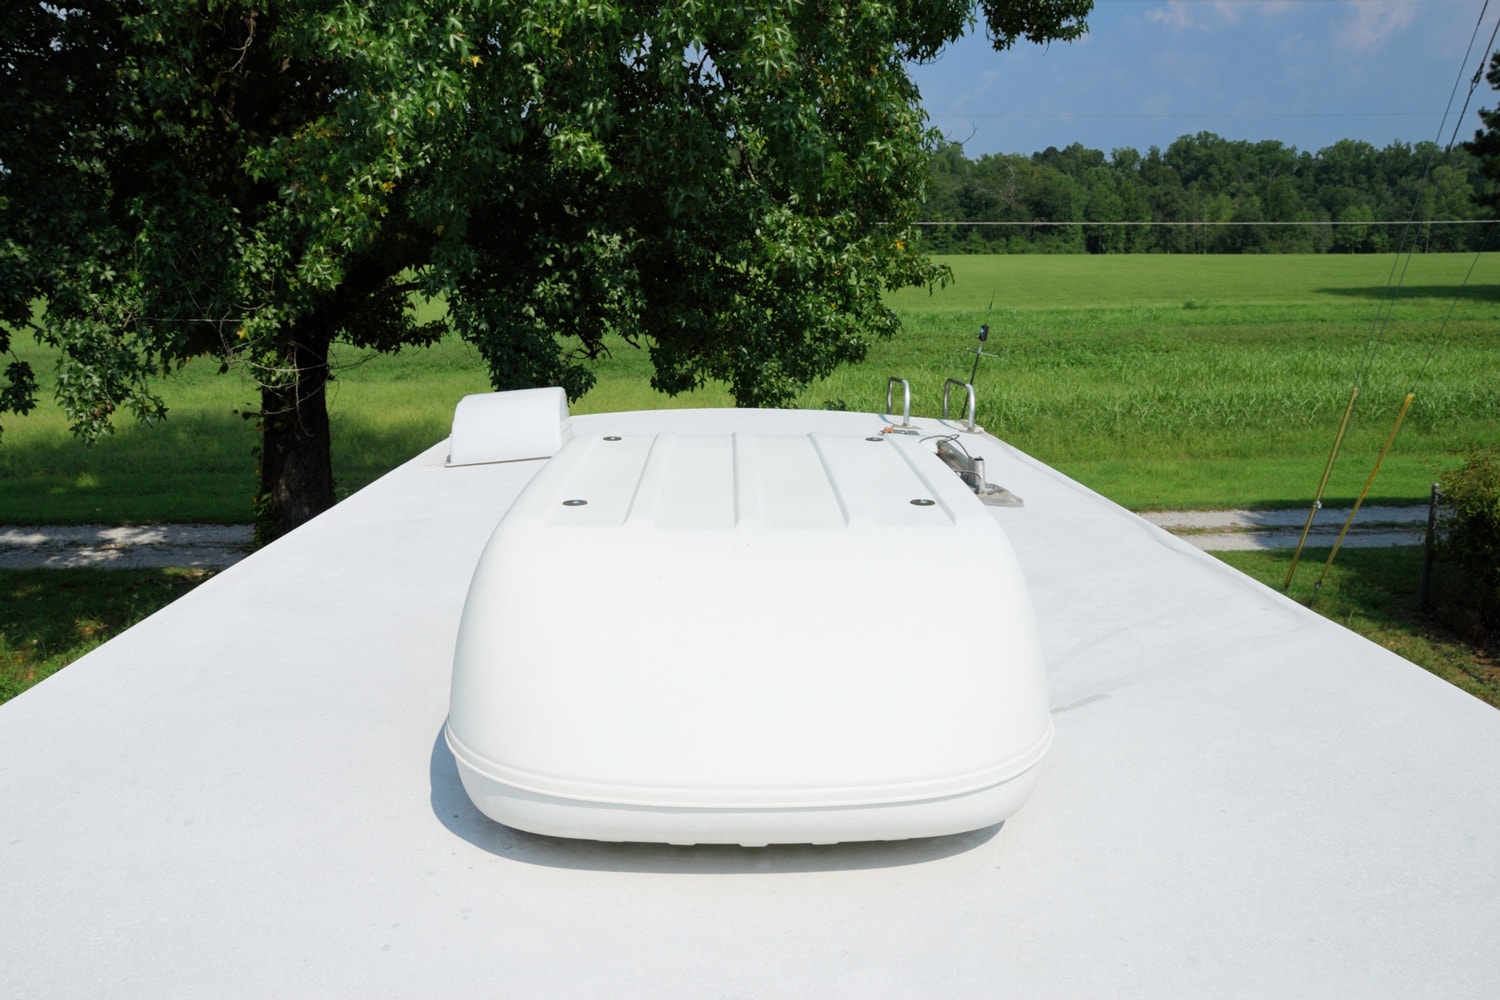 Photograph on roof of recreational vehicle looking into large field. RV roof has large air conditioning unit, ladder, and roof vents.